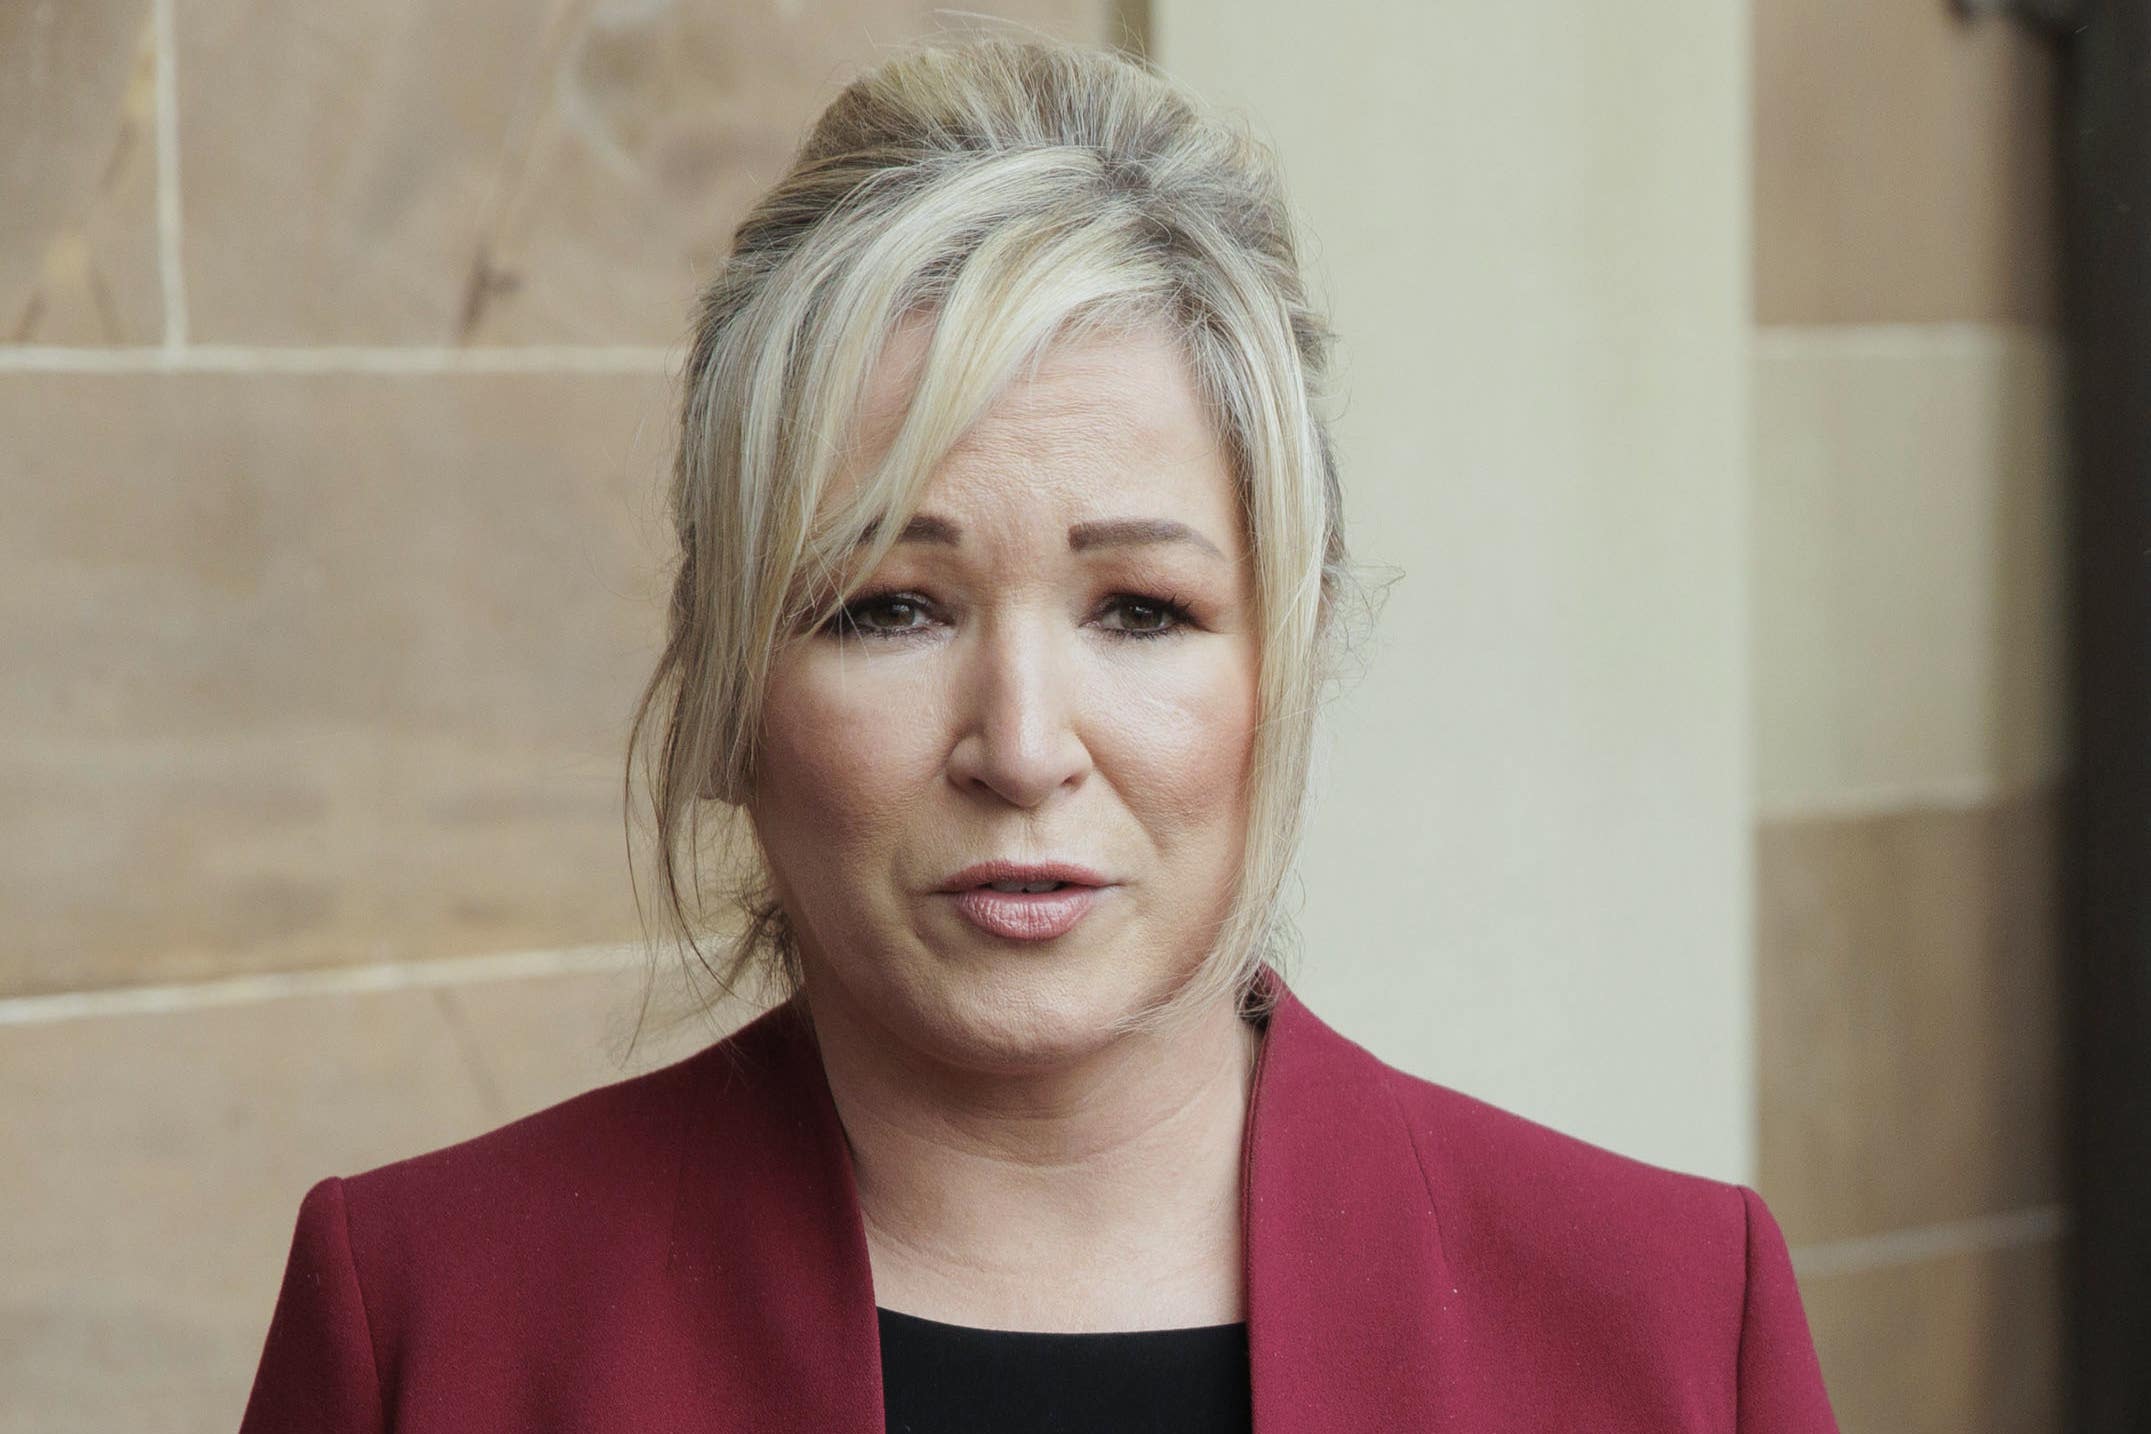 Michelle O’Neill says she has approached the leaders of the other parties in the ministerial executive to ensure ‘cohesion’ amid the political fallout